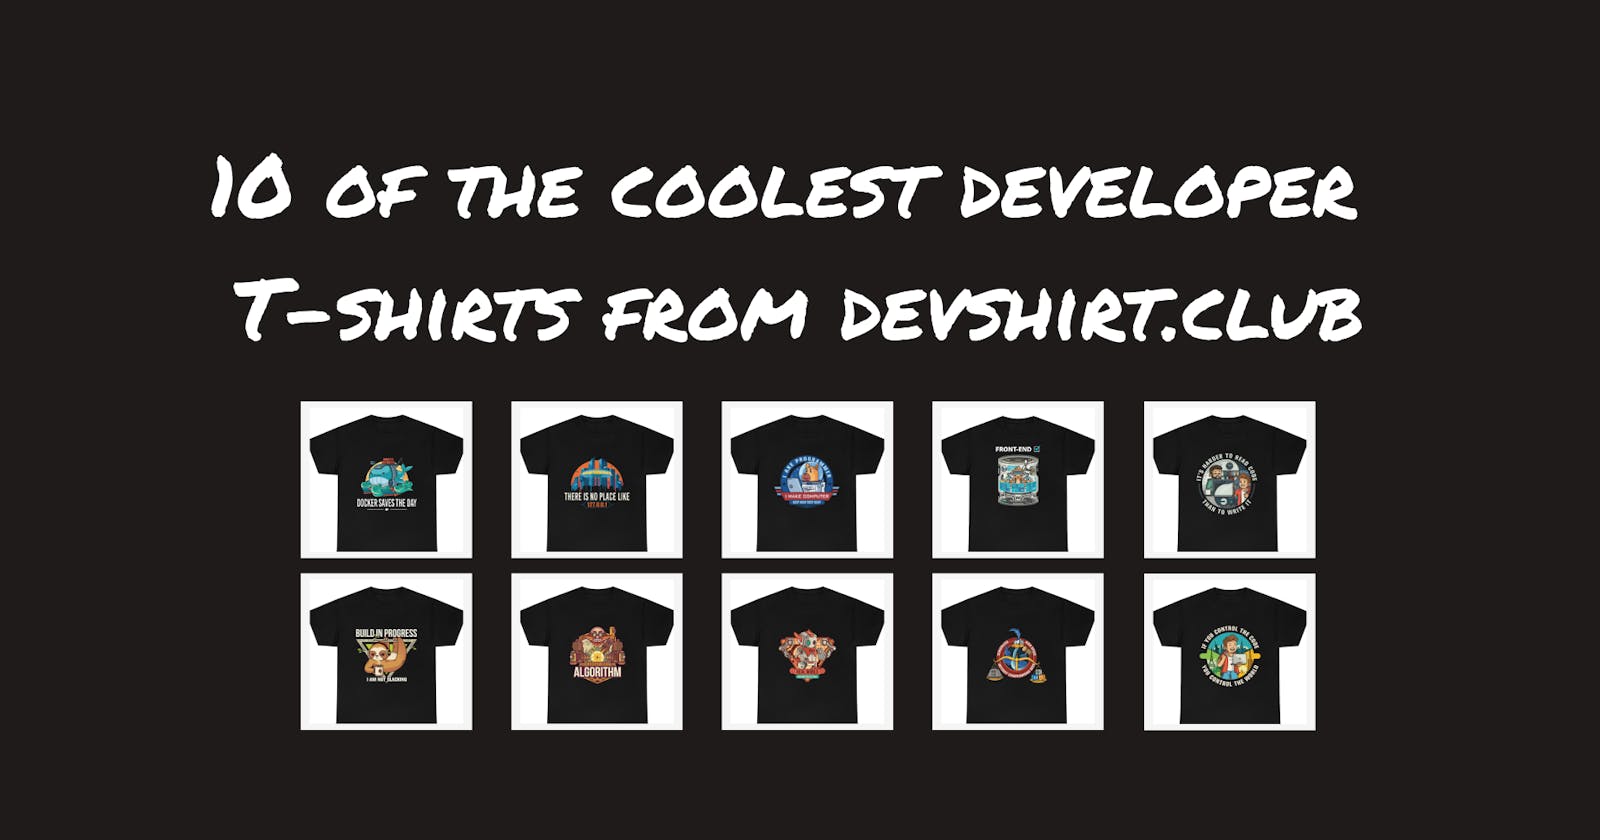 10 of the coolest developer T-shirts from devshirt.club